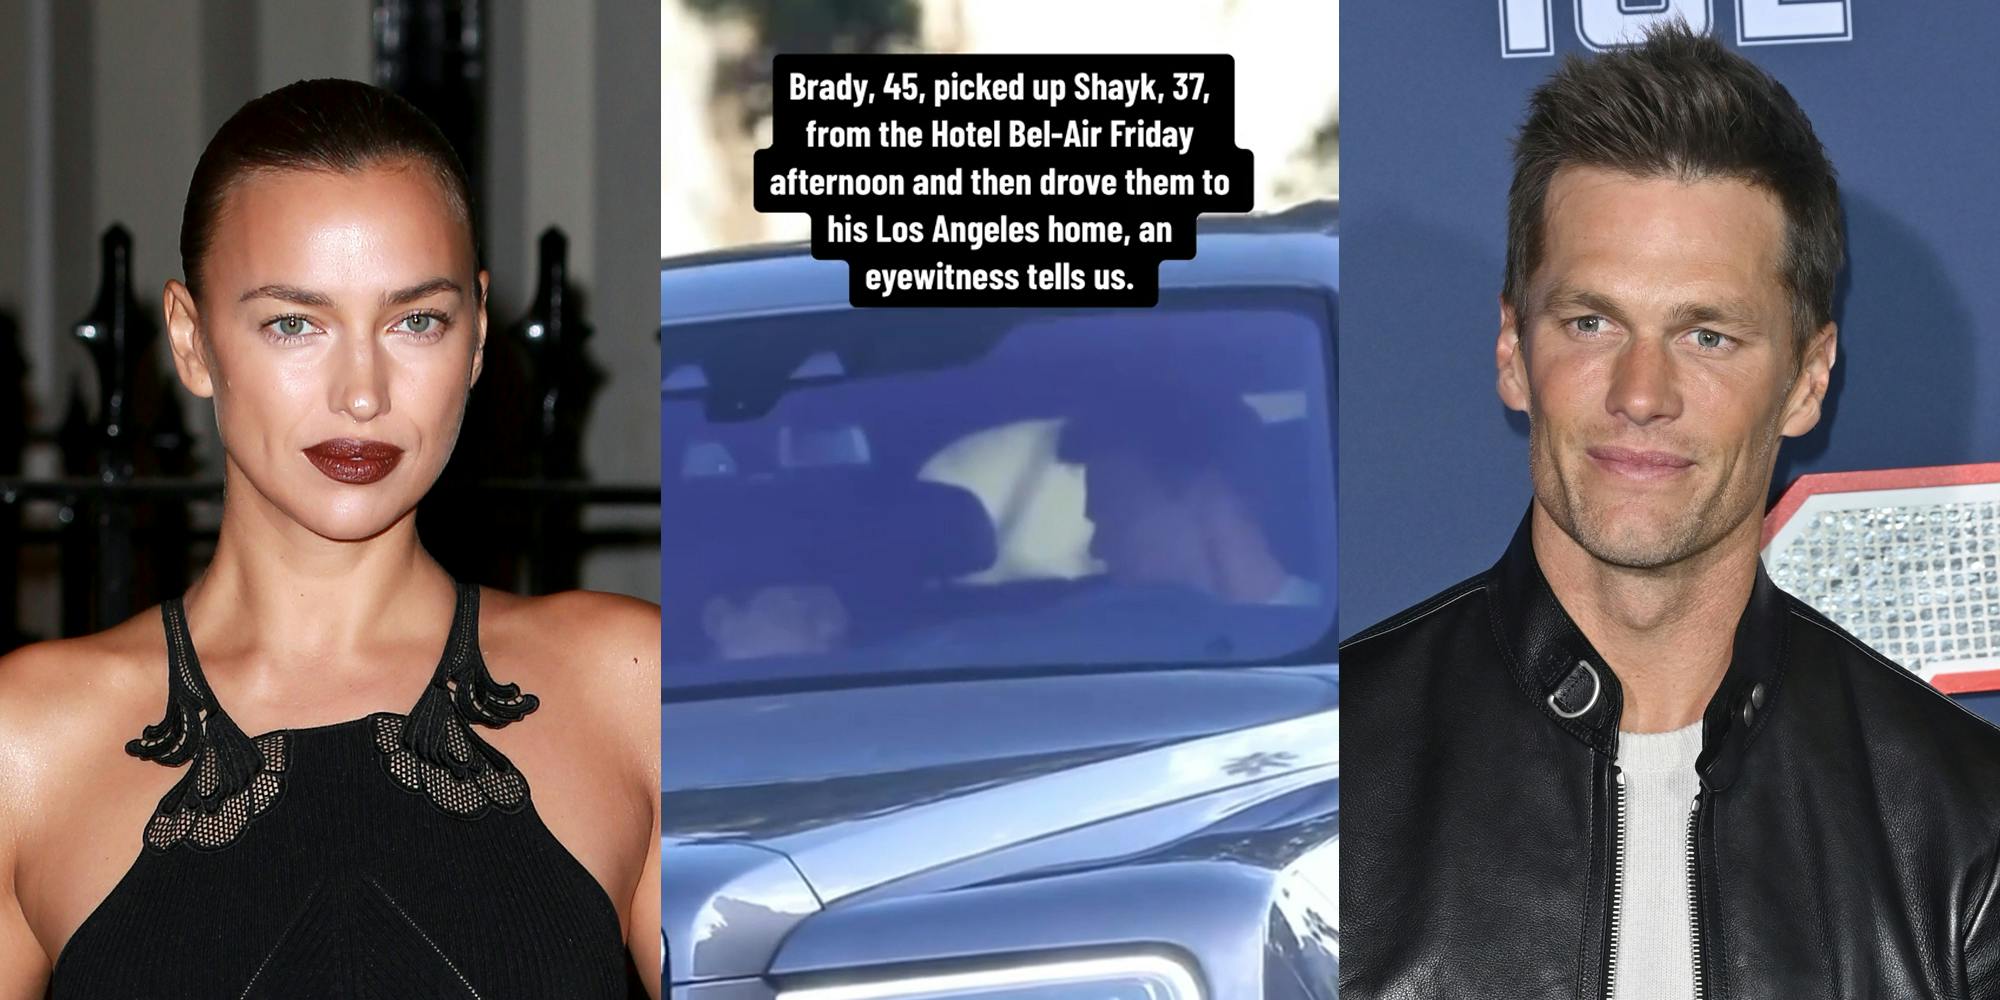 Irina Shayk in front of black fence background (l) man and woman in car with caption "Brady, 45, picked up Shayk, 37, from the Hotel Bel-Air Friday afternoon and then drove them to his Los Angeles home, an eyewitness tells us." (c) Tom Brady in front of blue background (r)